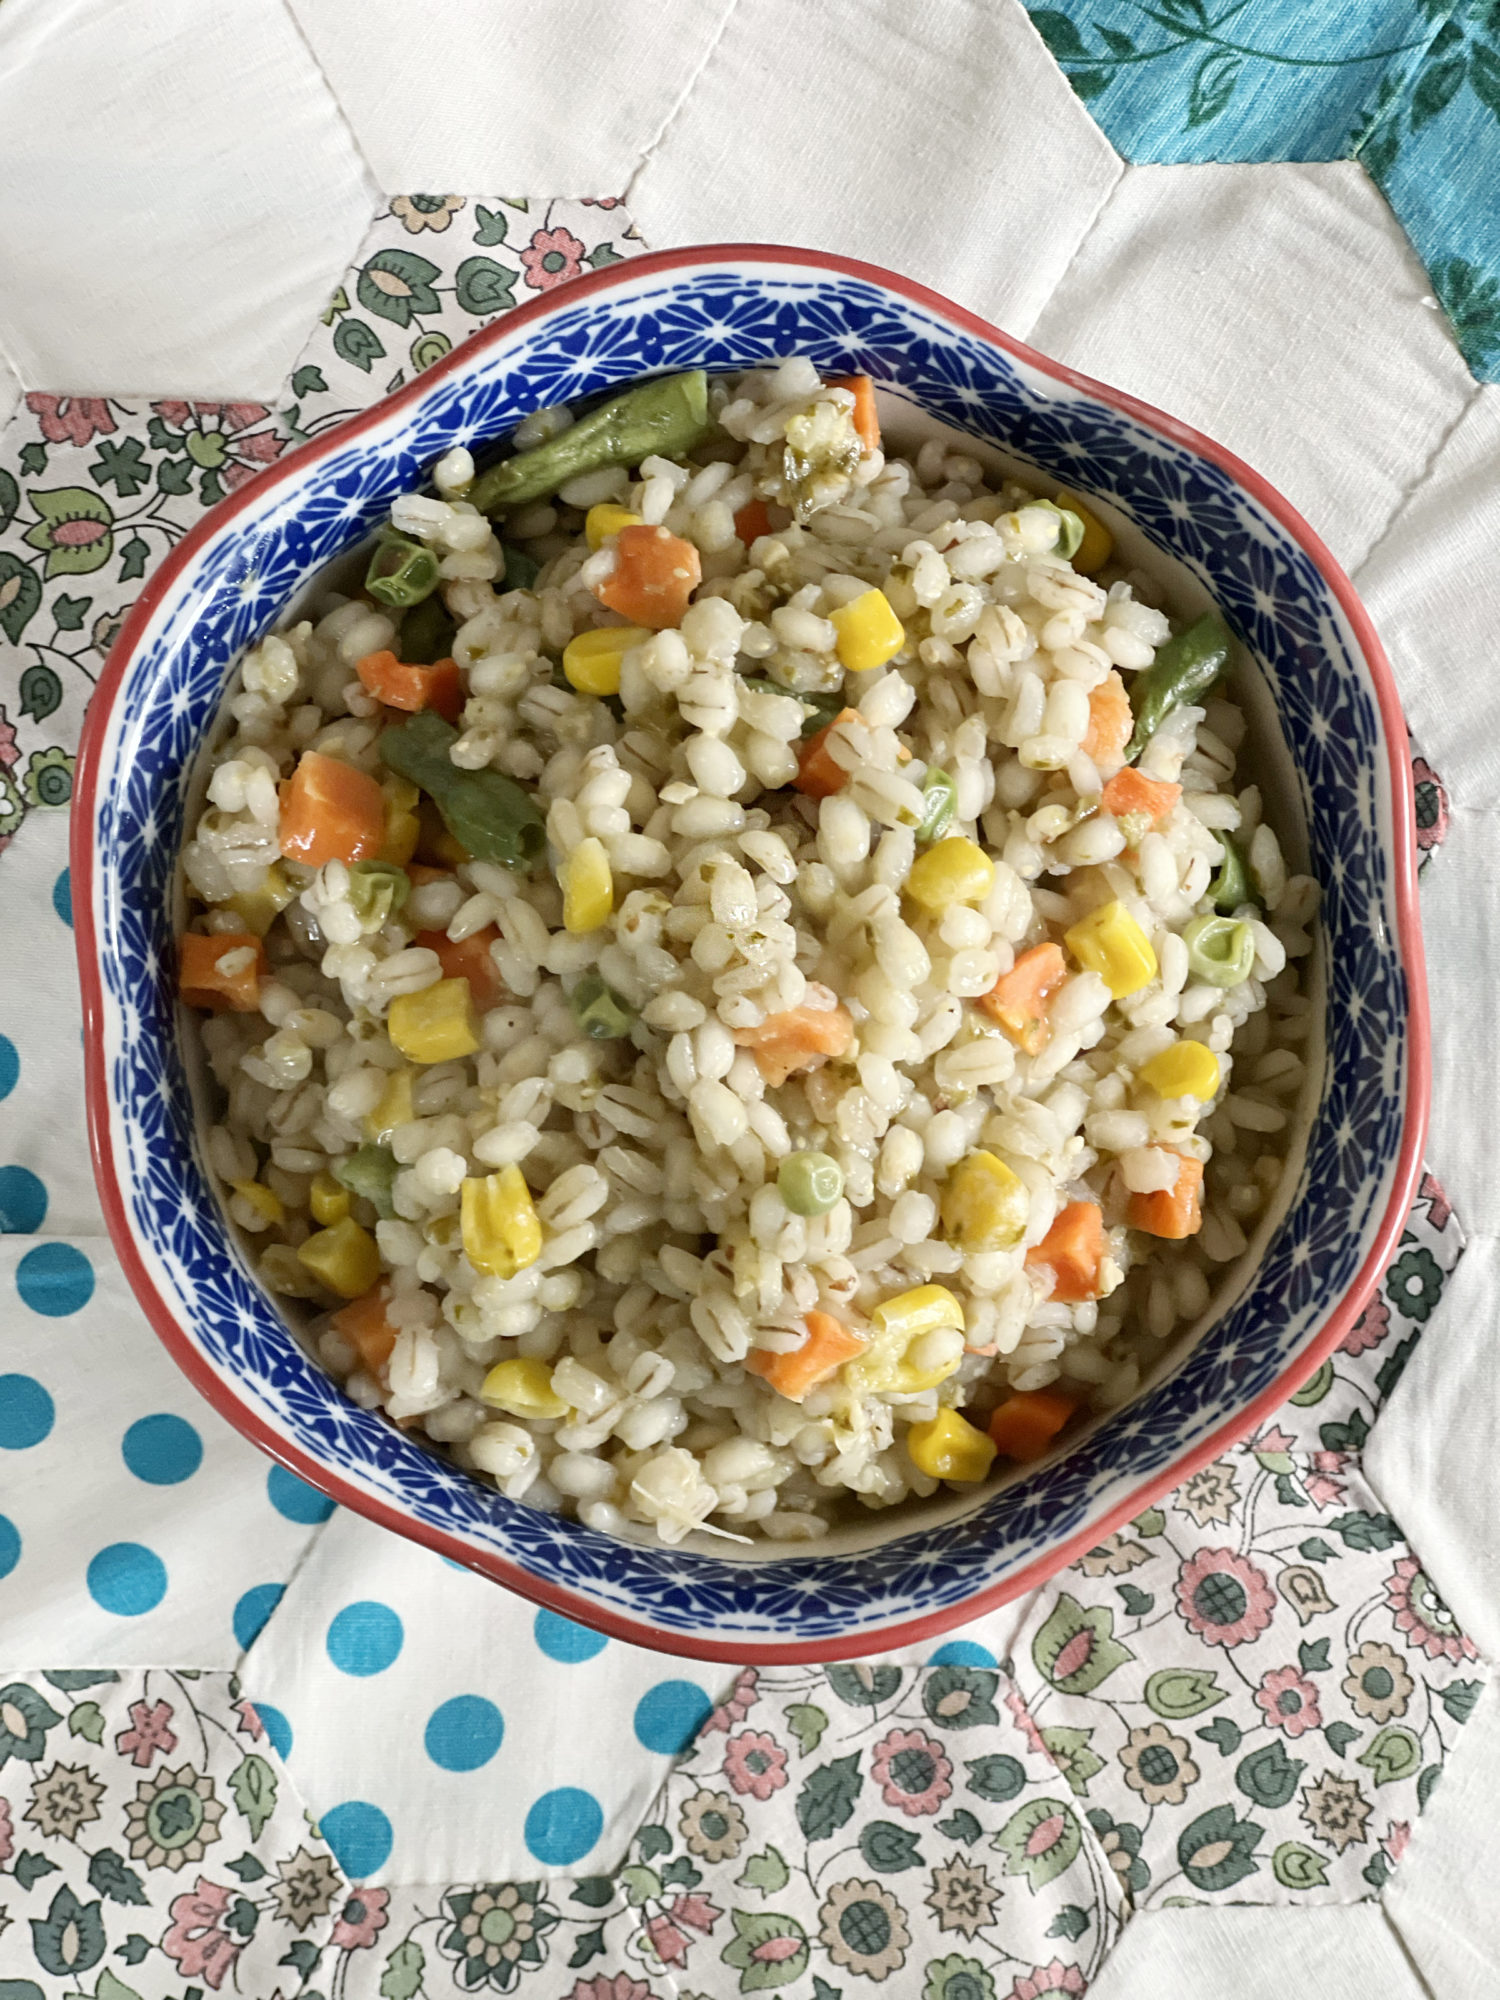 One-pot barley with veggies and pesto by Marla Meridith